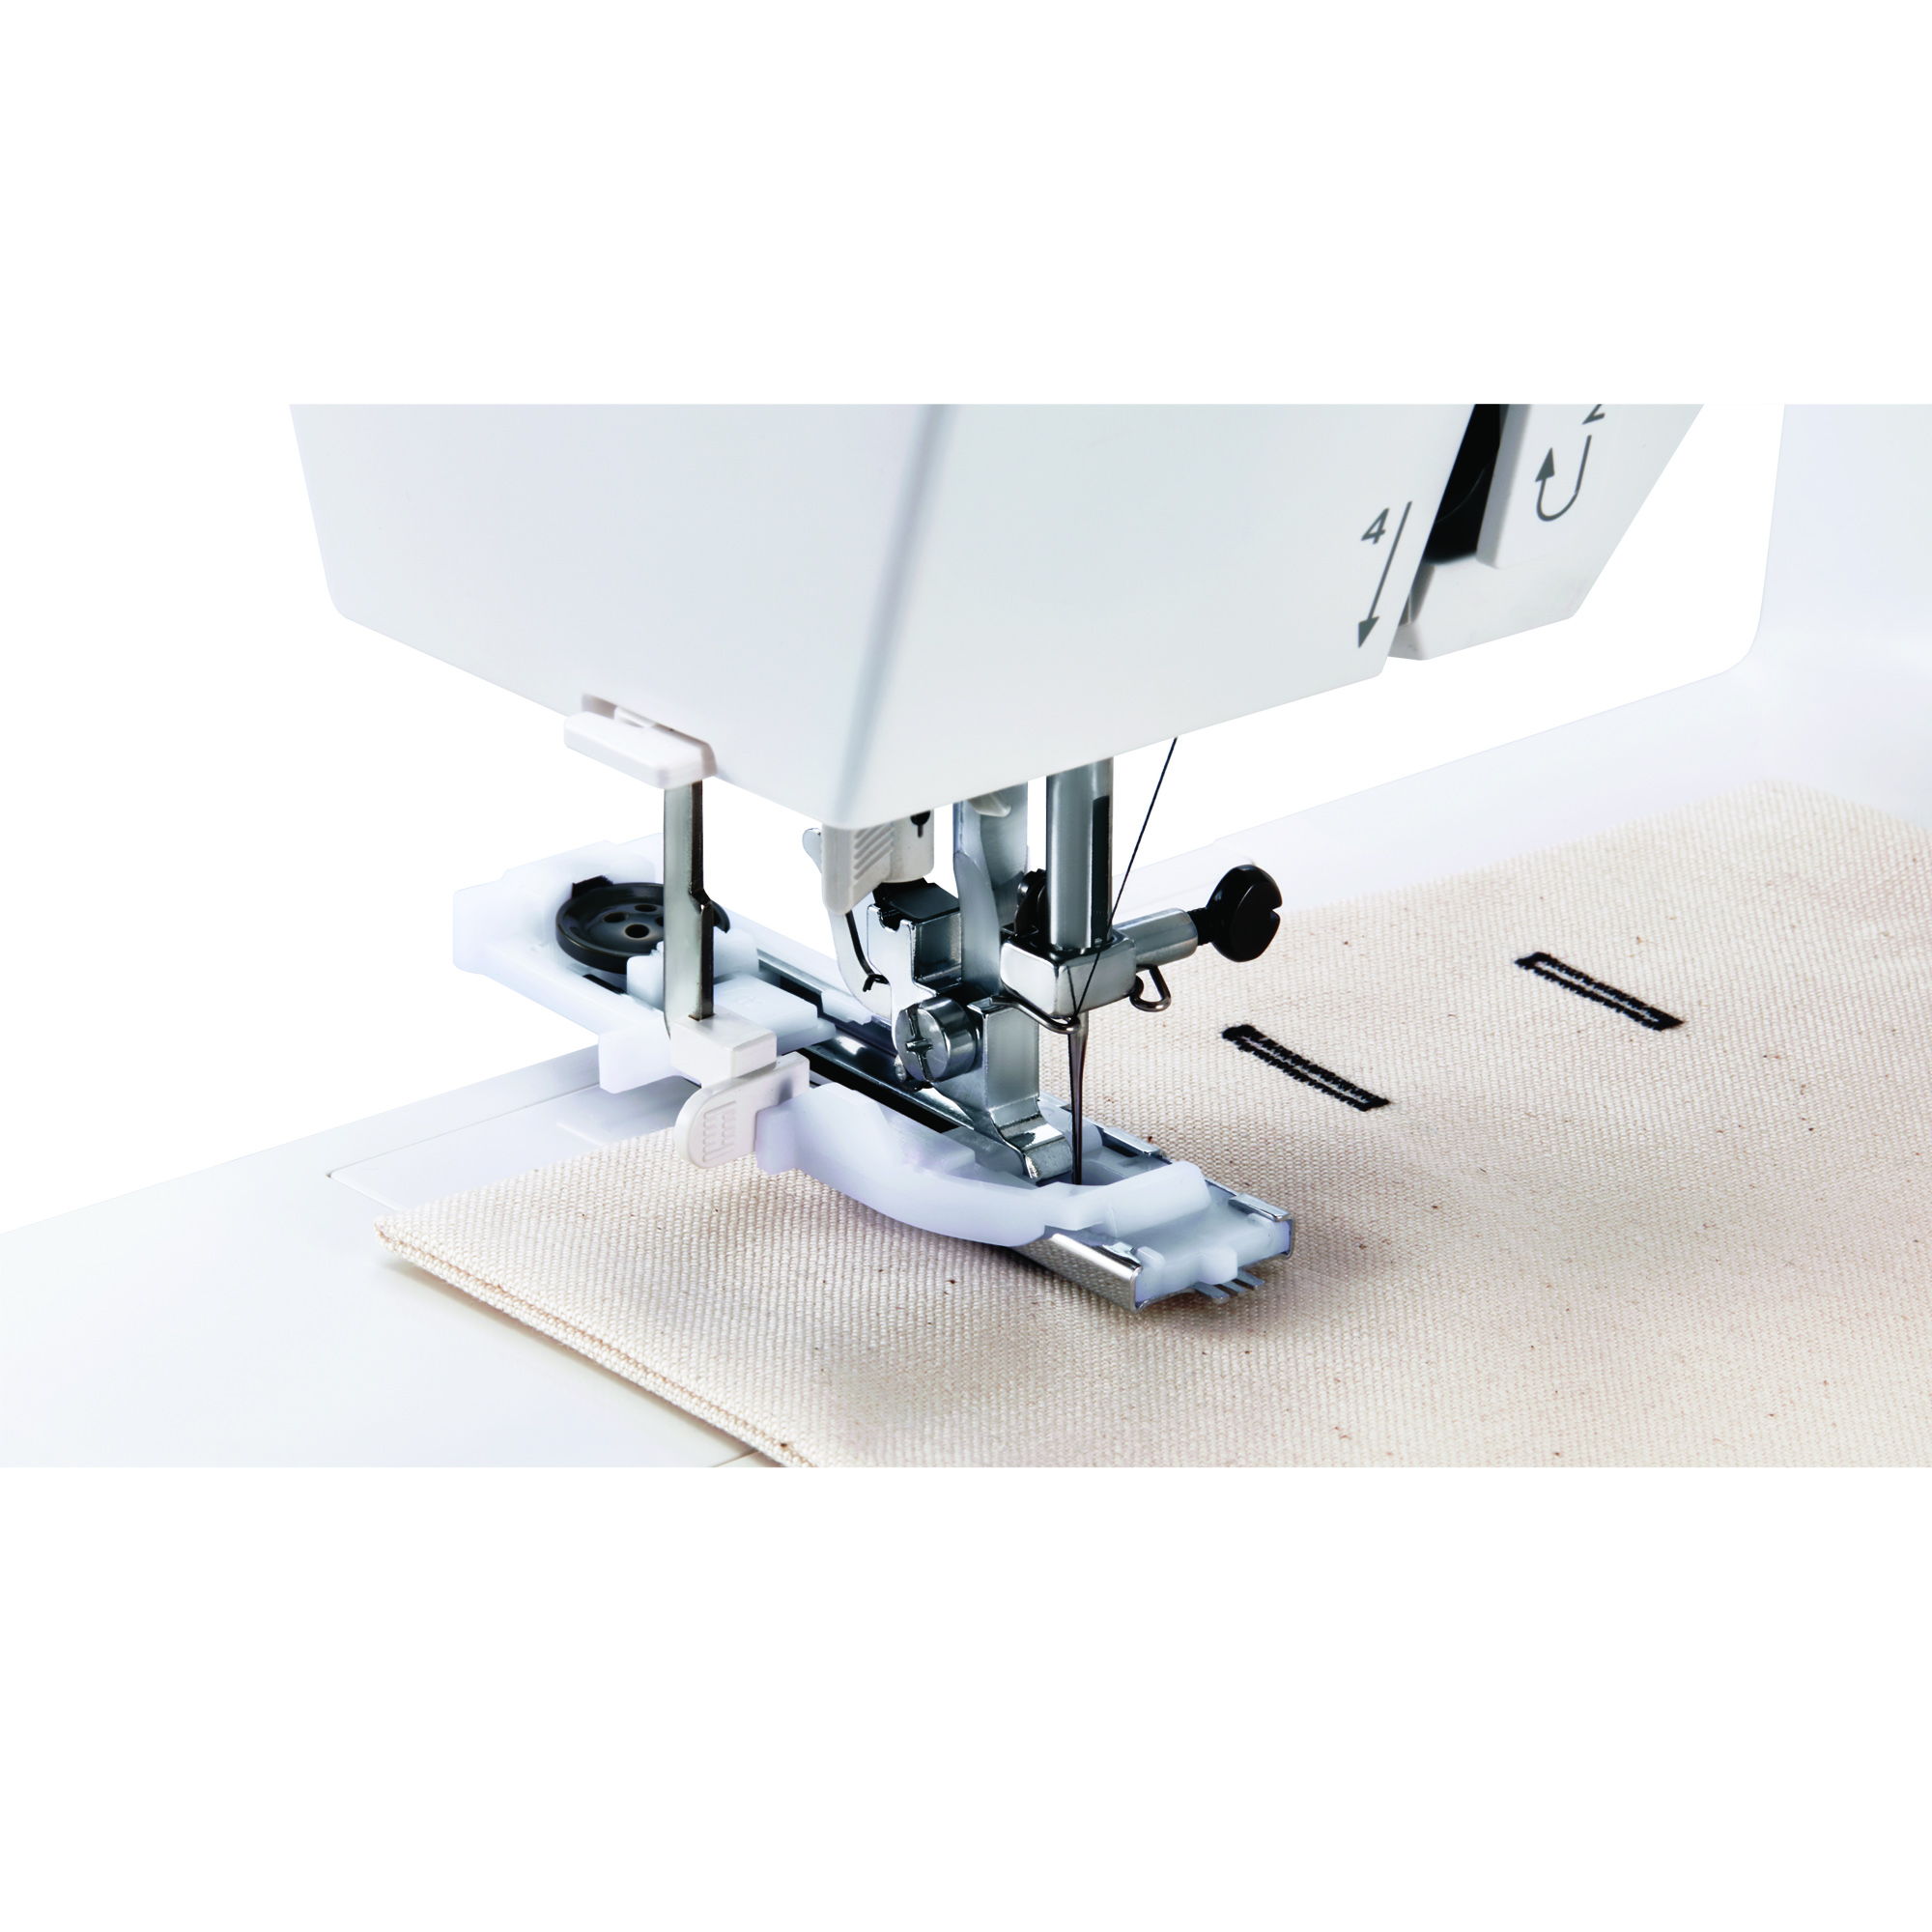 The Perfect Beginner Sewing Machine - SewGood™